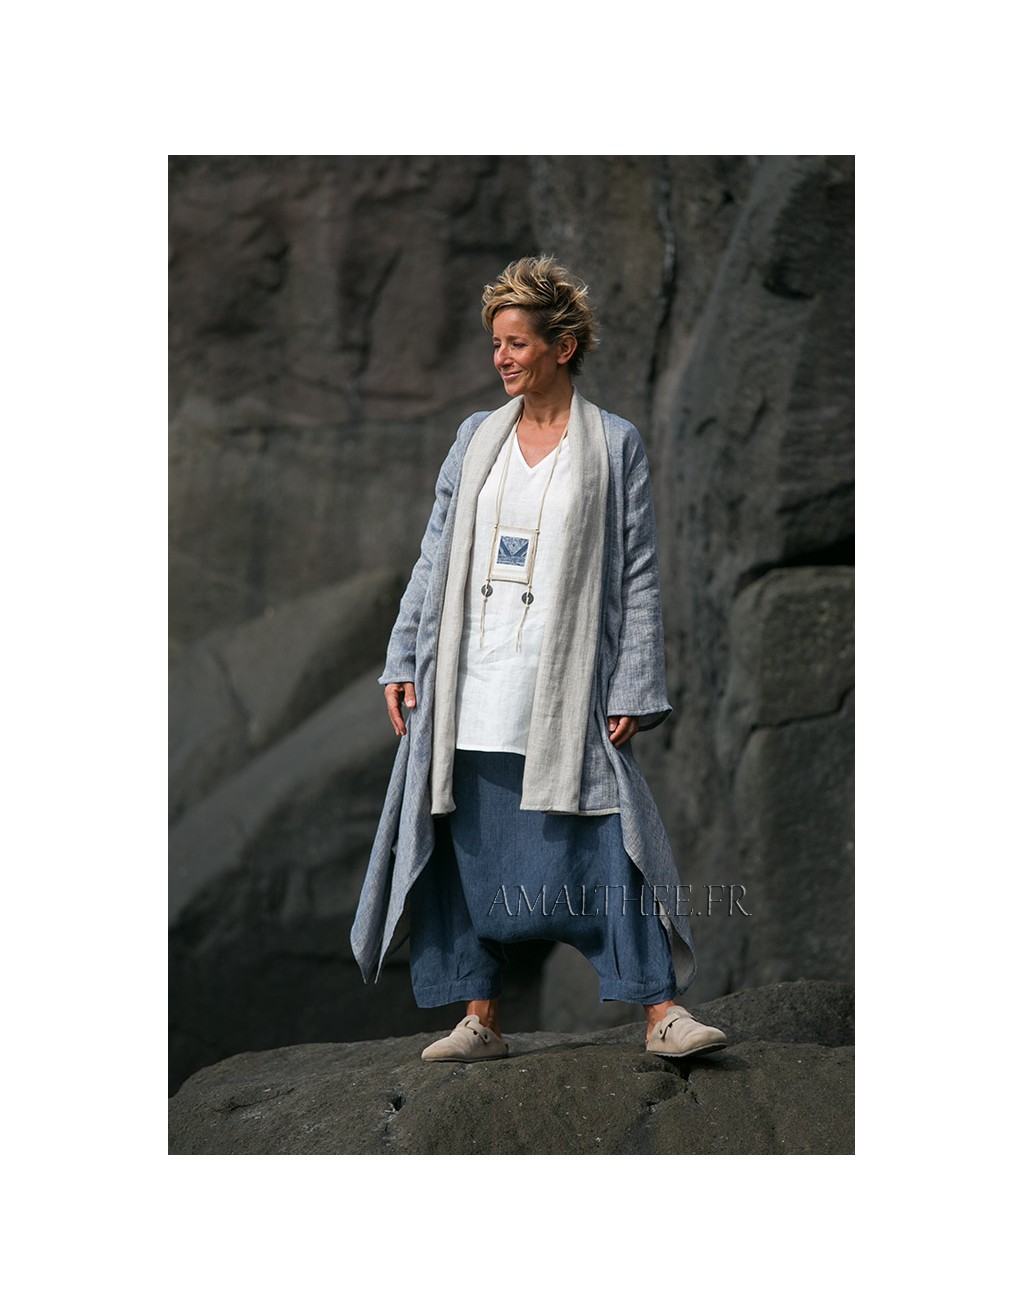 Spring-summer season Blue linen  coat 2 layers woven together oatmeal and blue